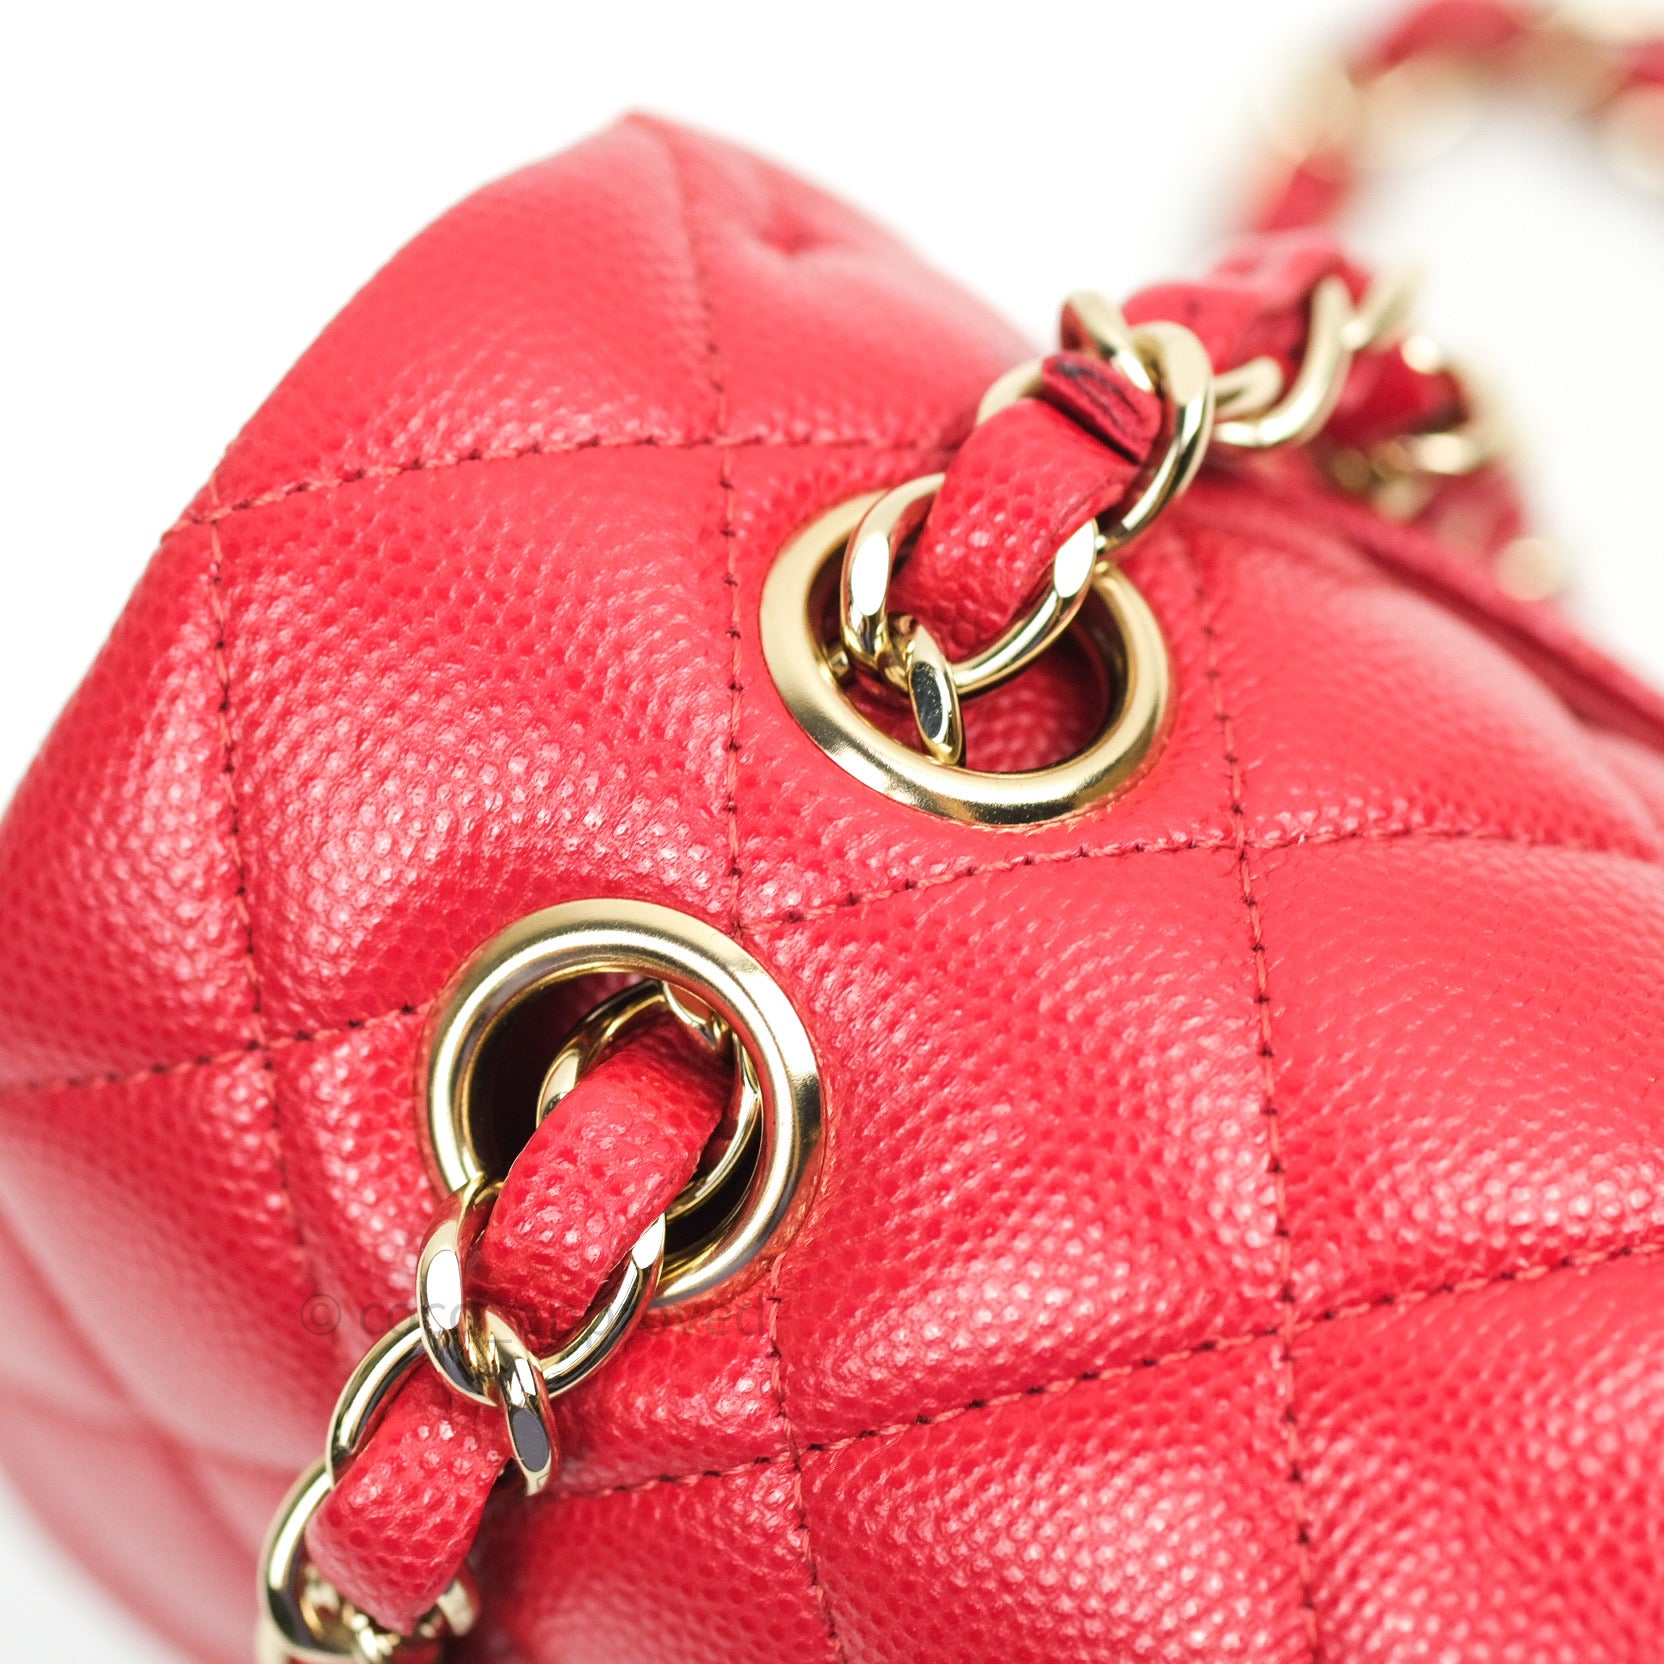 Chanel Classic Small S/M Flap Red Caviar Gold Hardware 19B – Coco Approved  Studio